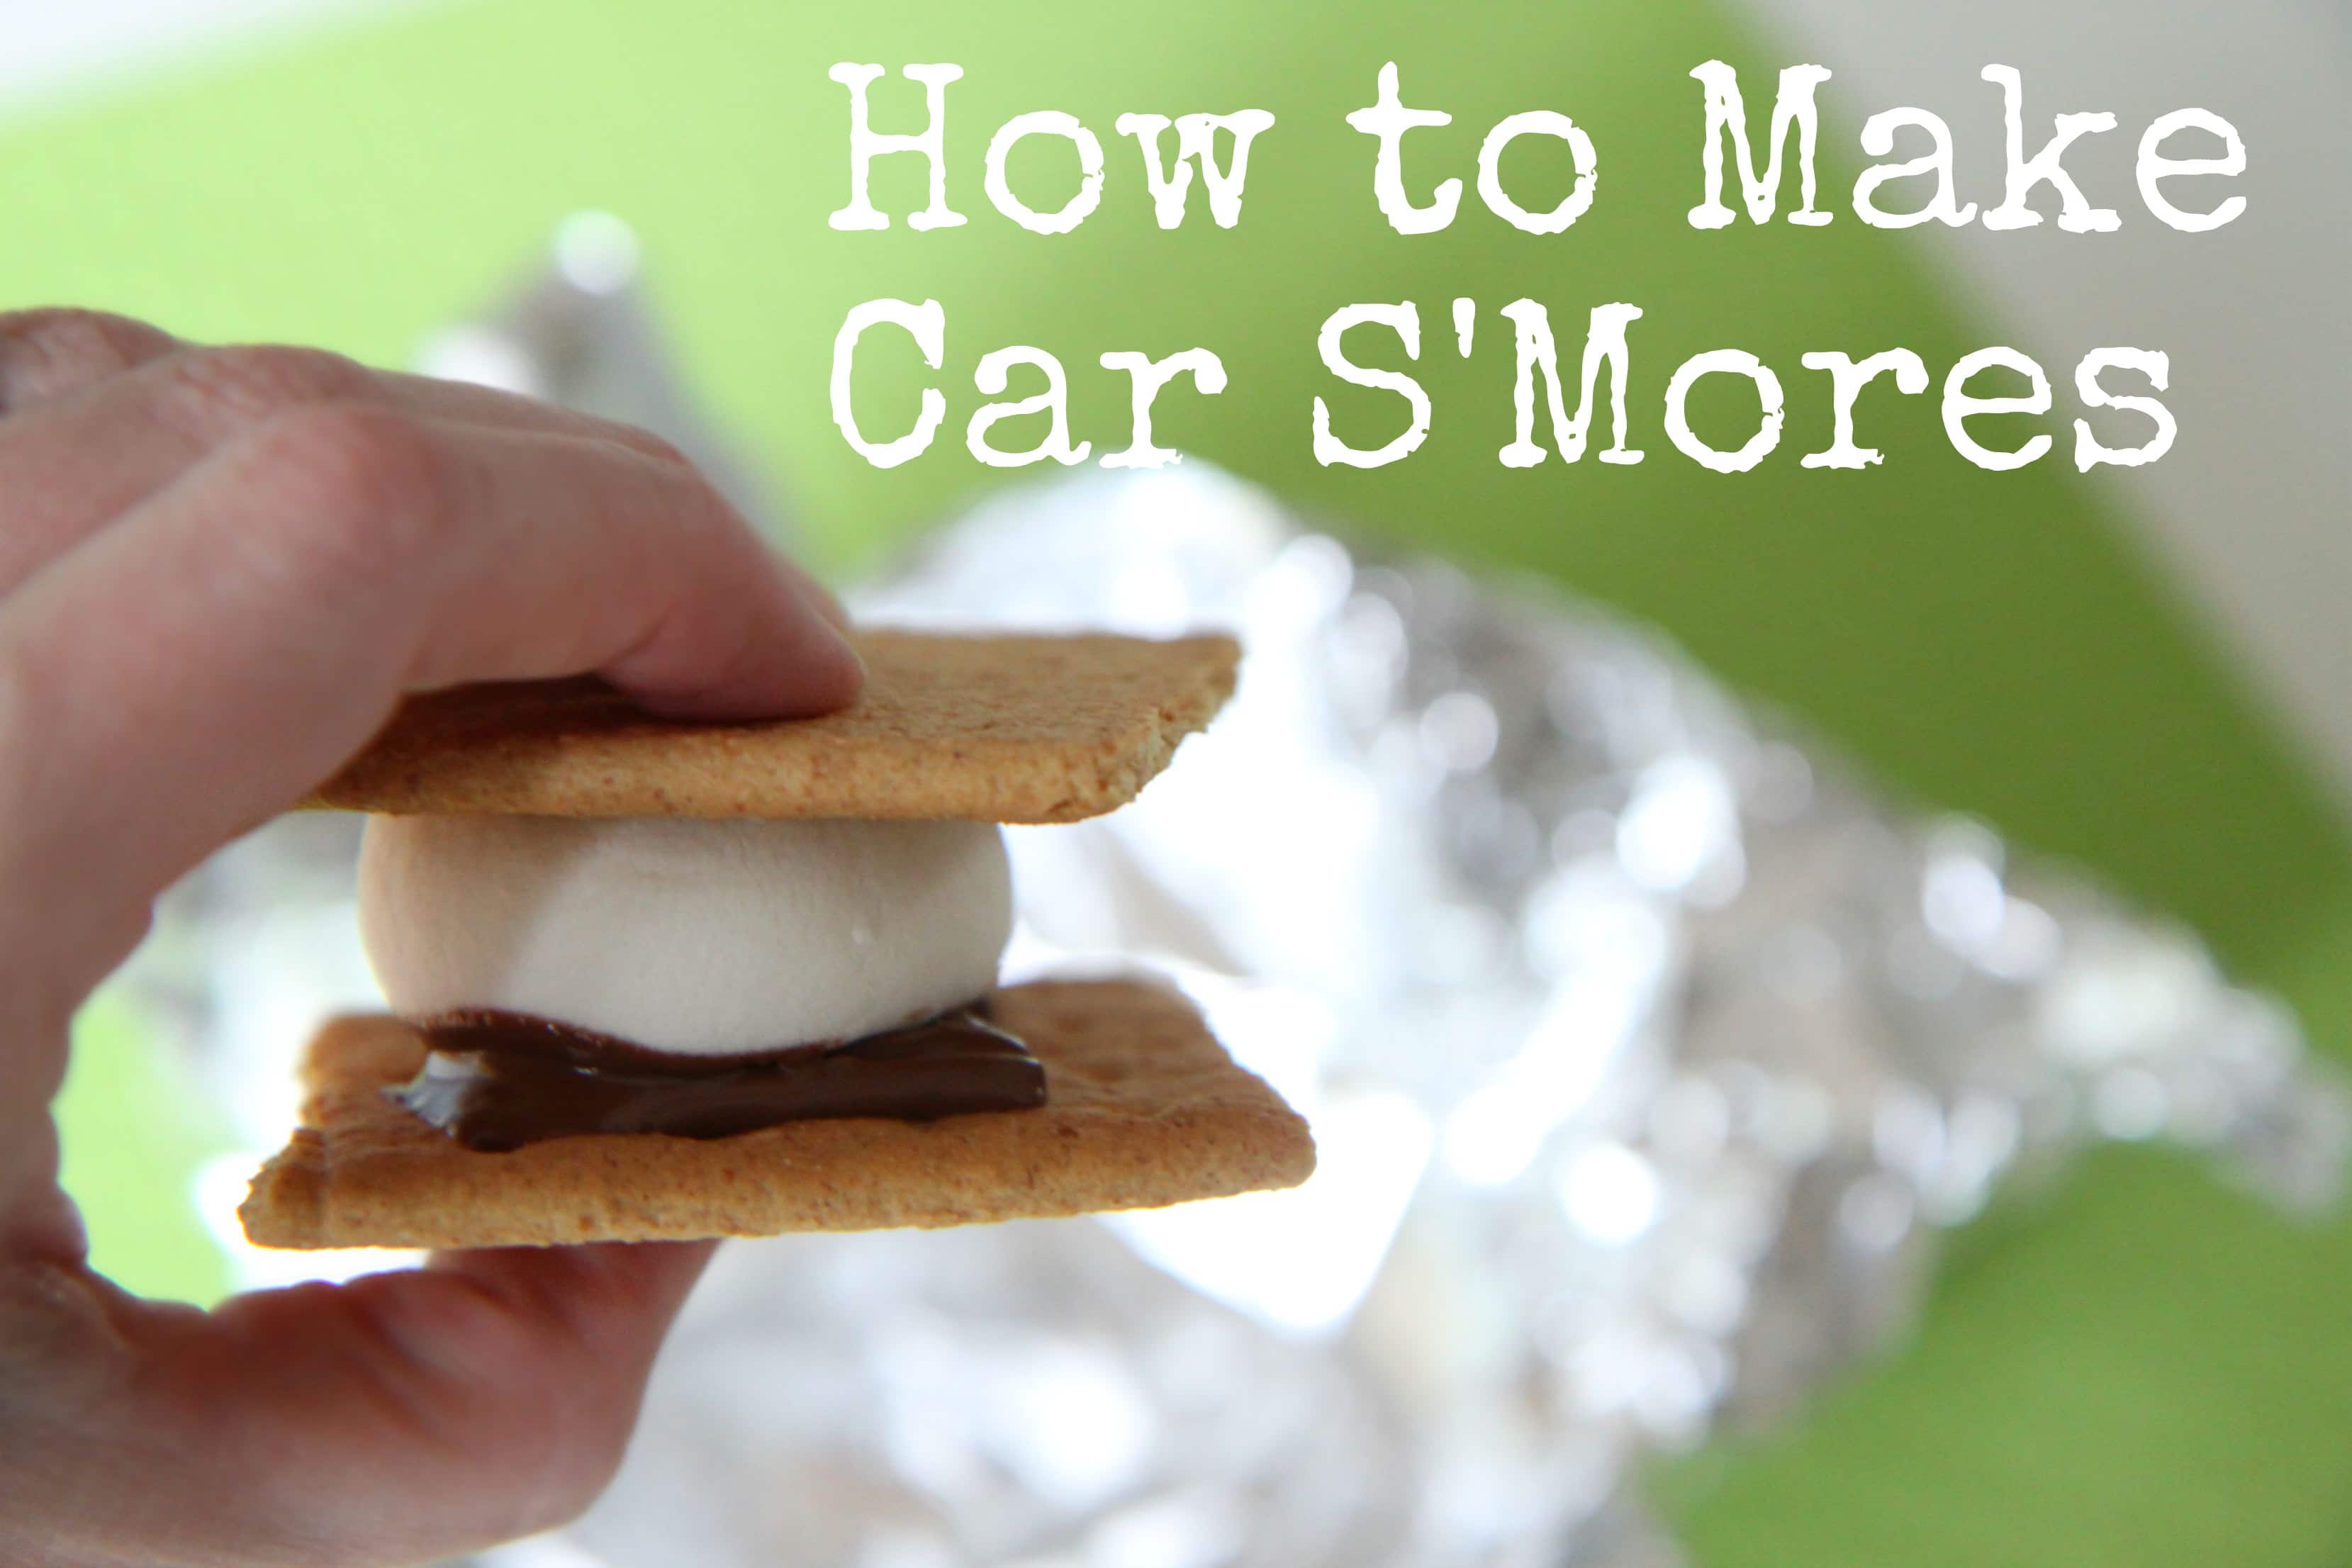 How to Make Car S'mores from MomAdvice.com